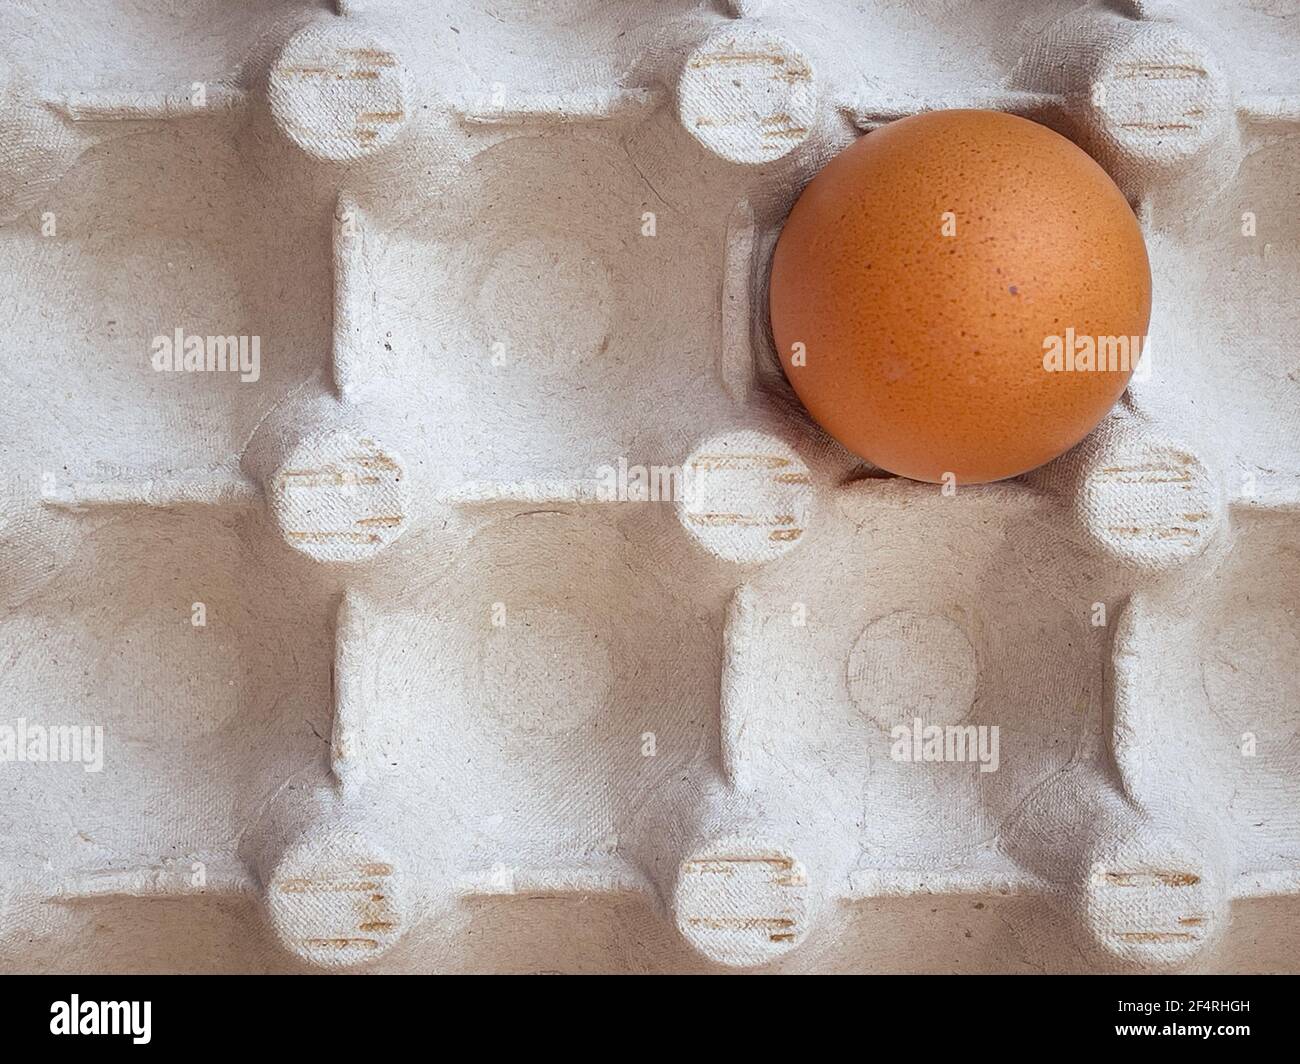 Brown eggs in cardboard egg box. Top view of raw organic chicken eggs in carton. Stock Photo